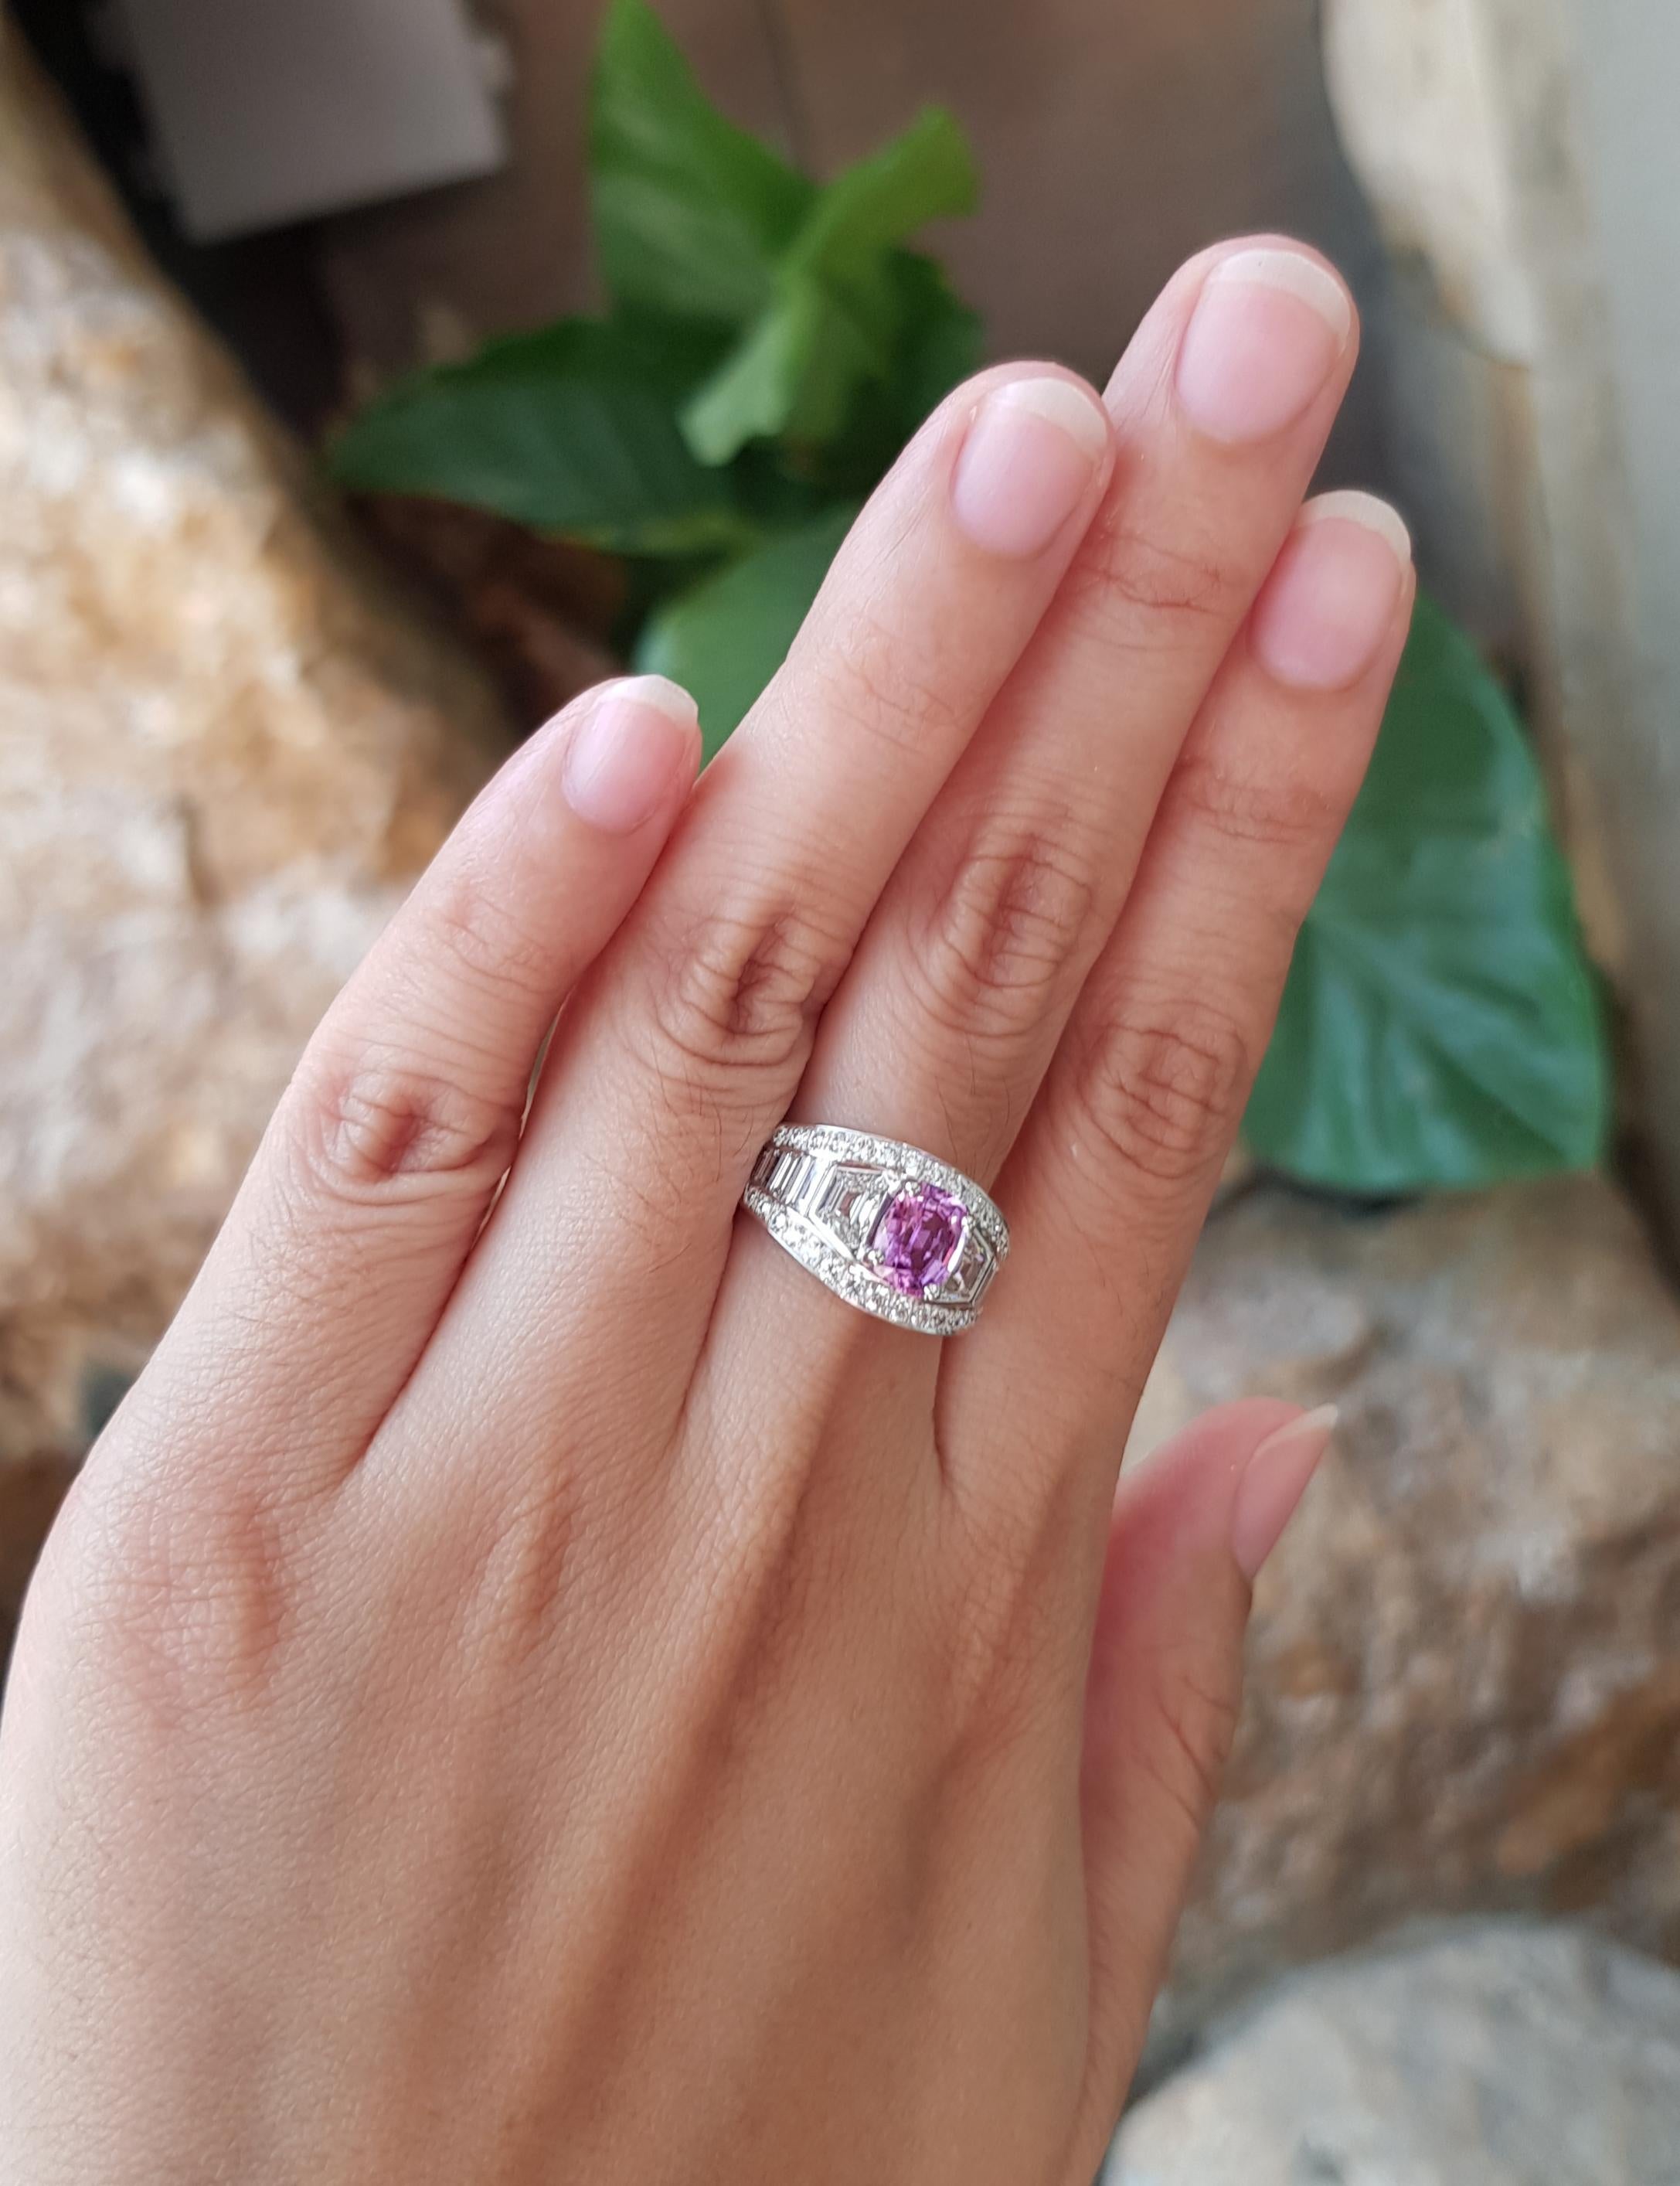 Pink Sapphire 1.24 carats with Diamond 1.81 carats Ring set in 18 Karat White Gold Settings

Width:  1.4 cm 
Length: 1.1 cm
Ring Size: 53
Total Weight: 6.49 grams

